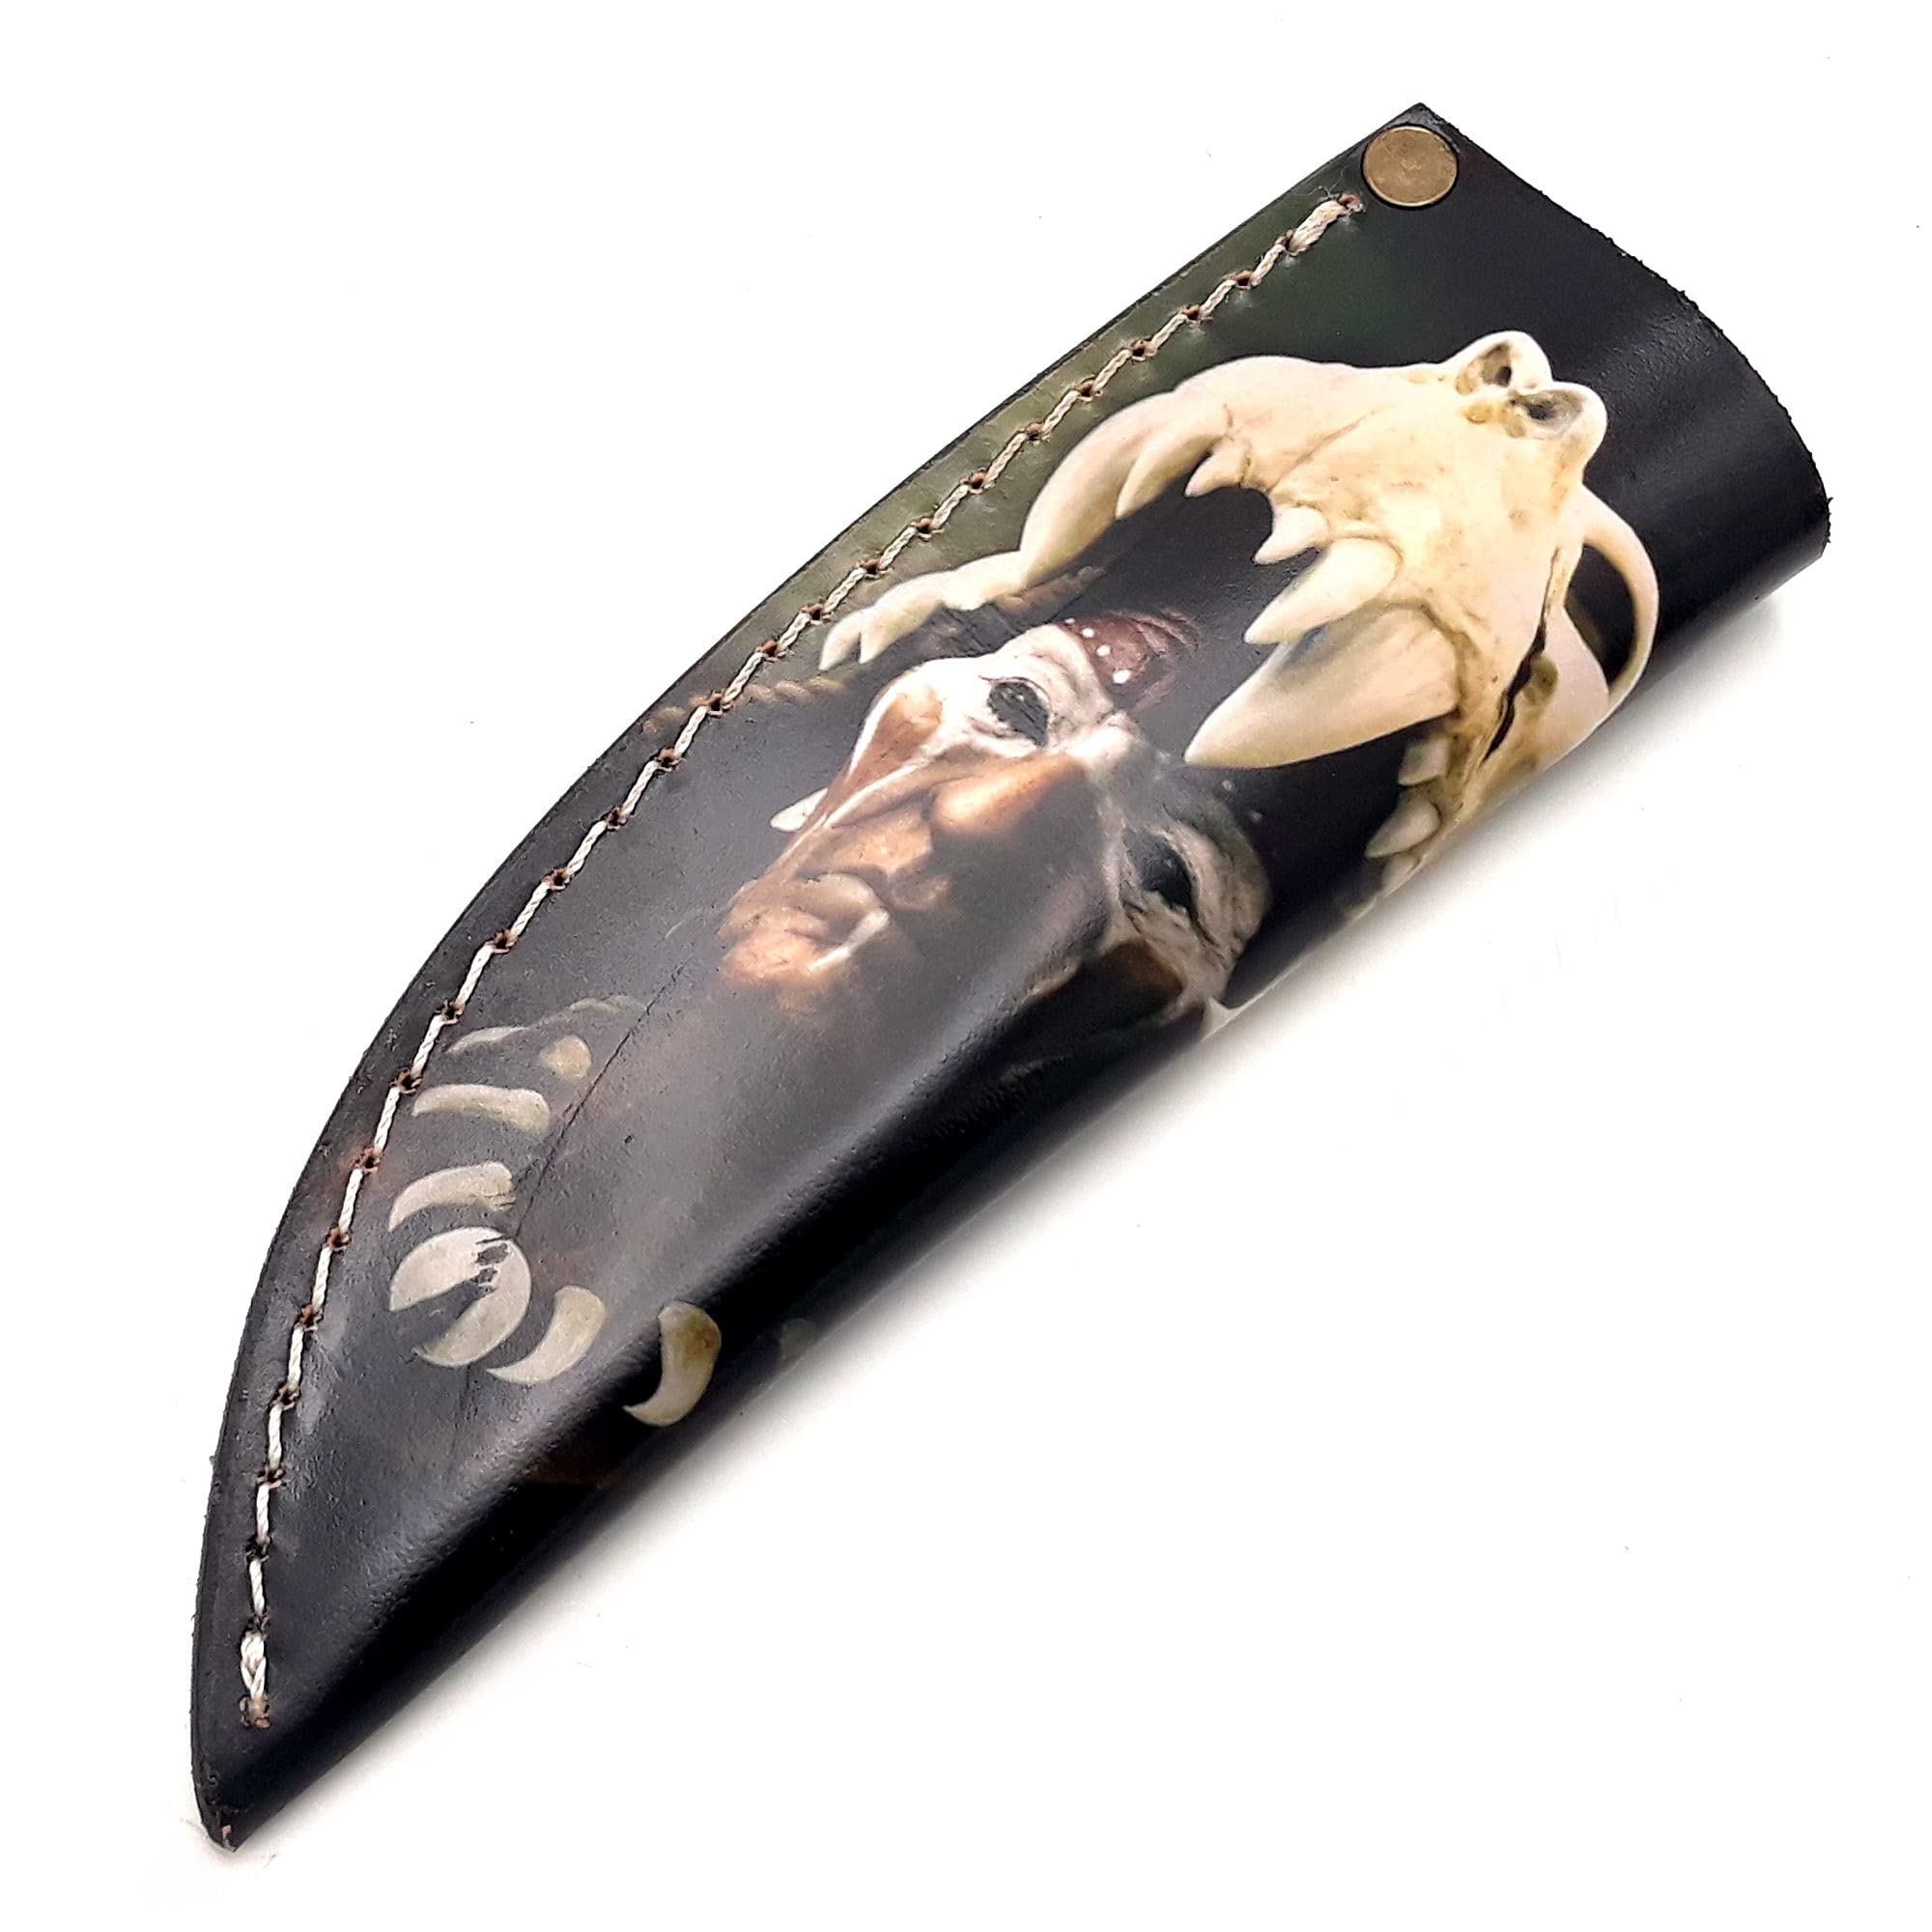 CK-703 Real Leather Sheath for Hunting Blades and Knife Making Supplies with Printed Images